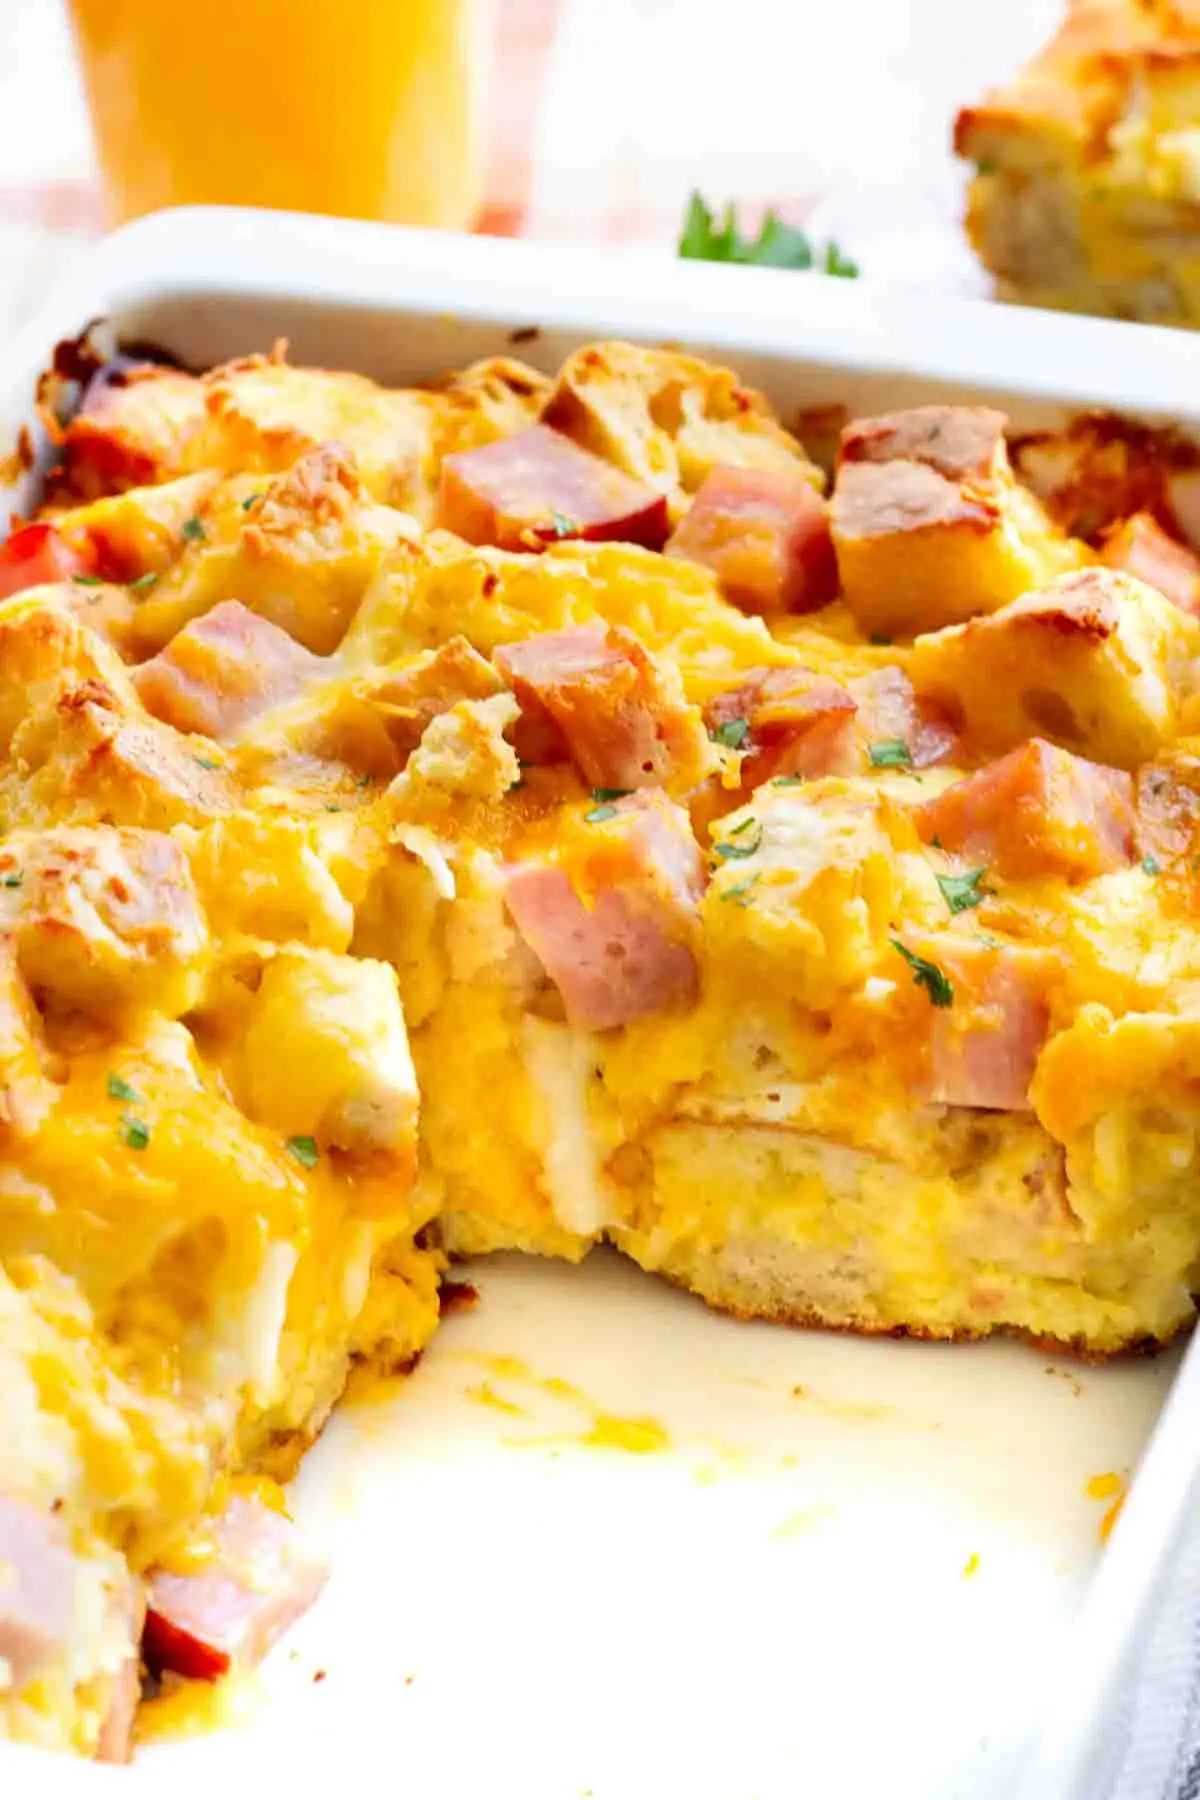 A Ham and Cheese English Muffin Breakfast Casserole in white dish